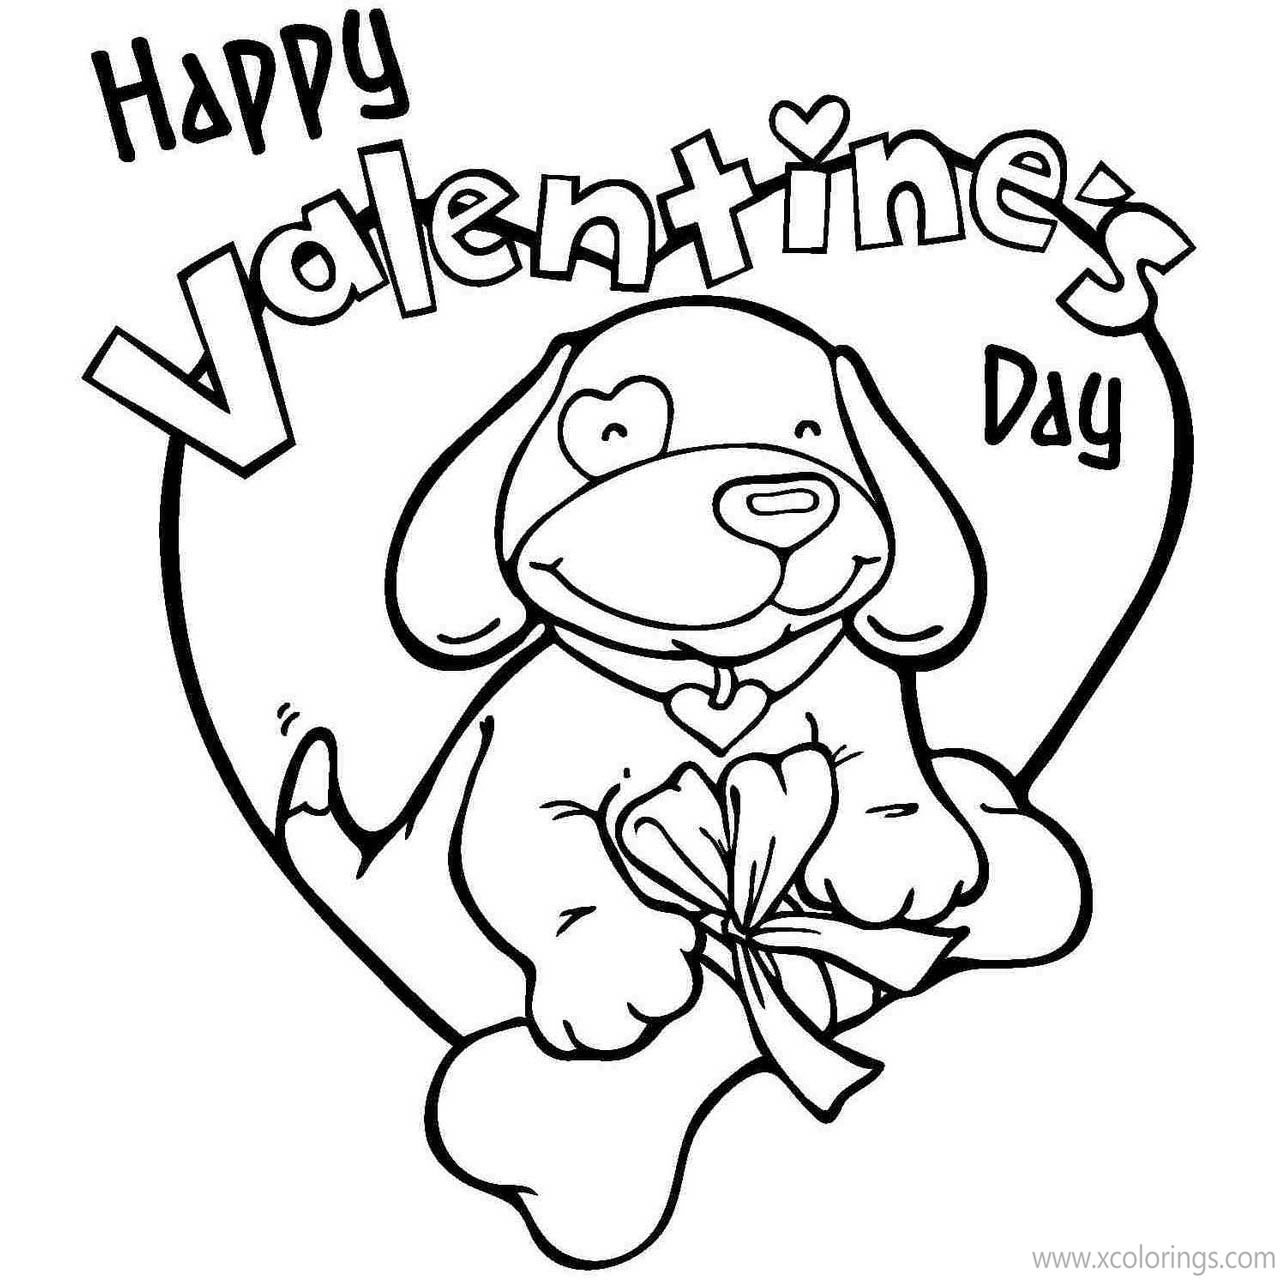 Free Puppy Valentines Day Coloring Pages printable